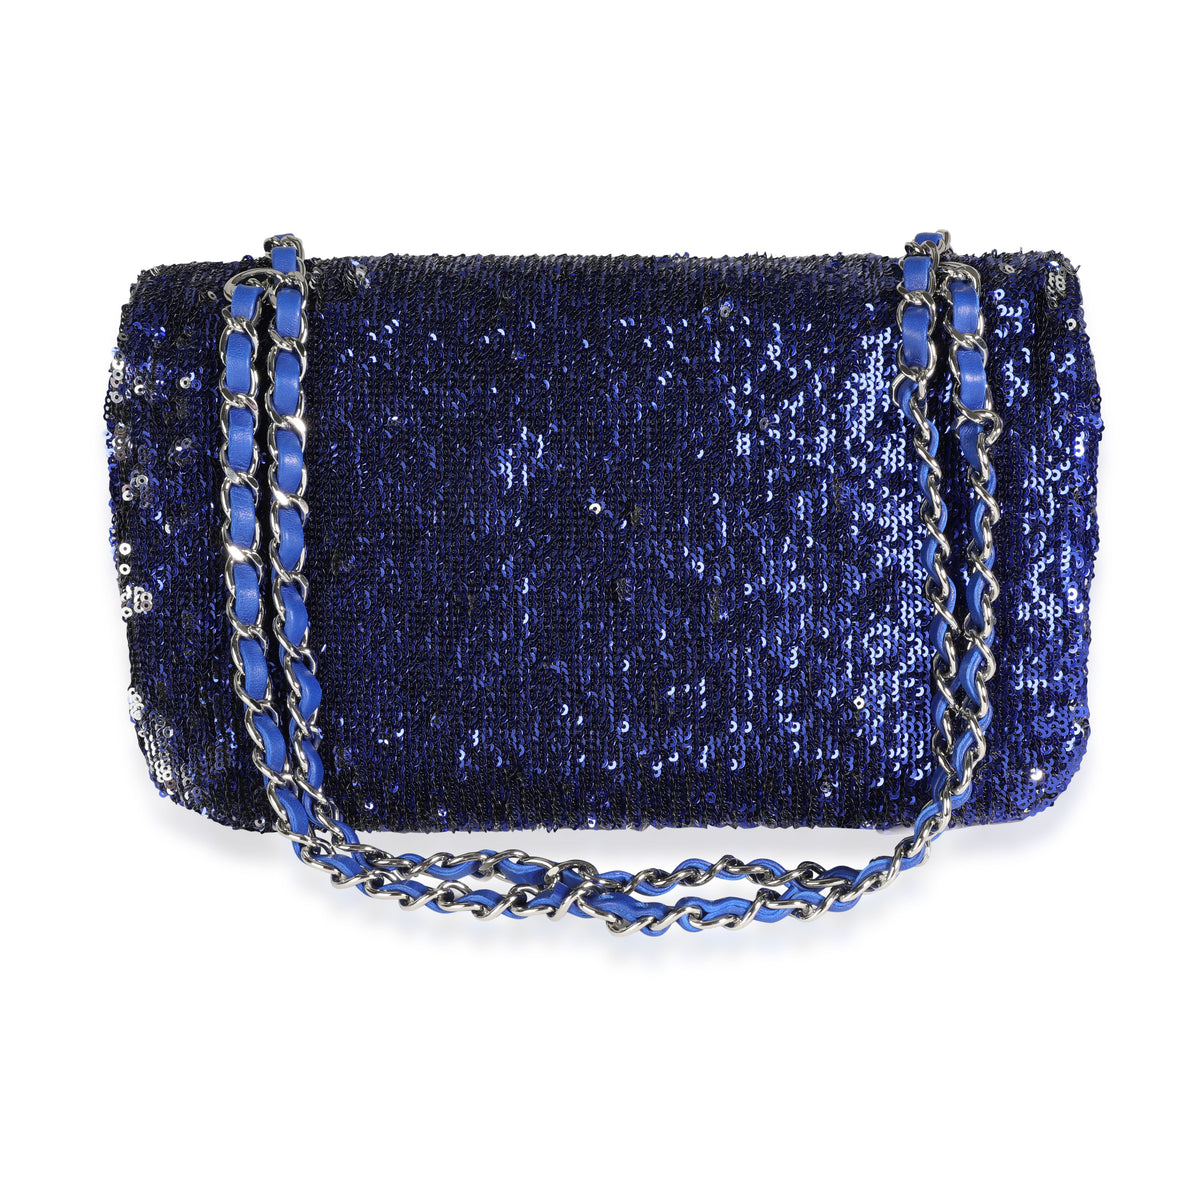 Chanel Blue and Black Sequined Medium Classic Single Flap Bag